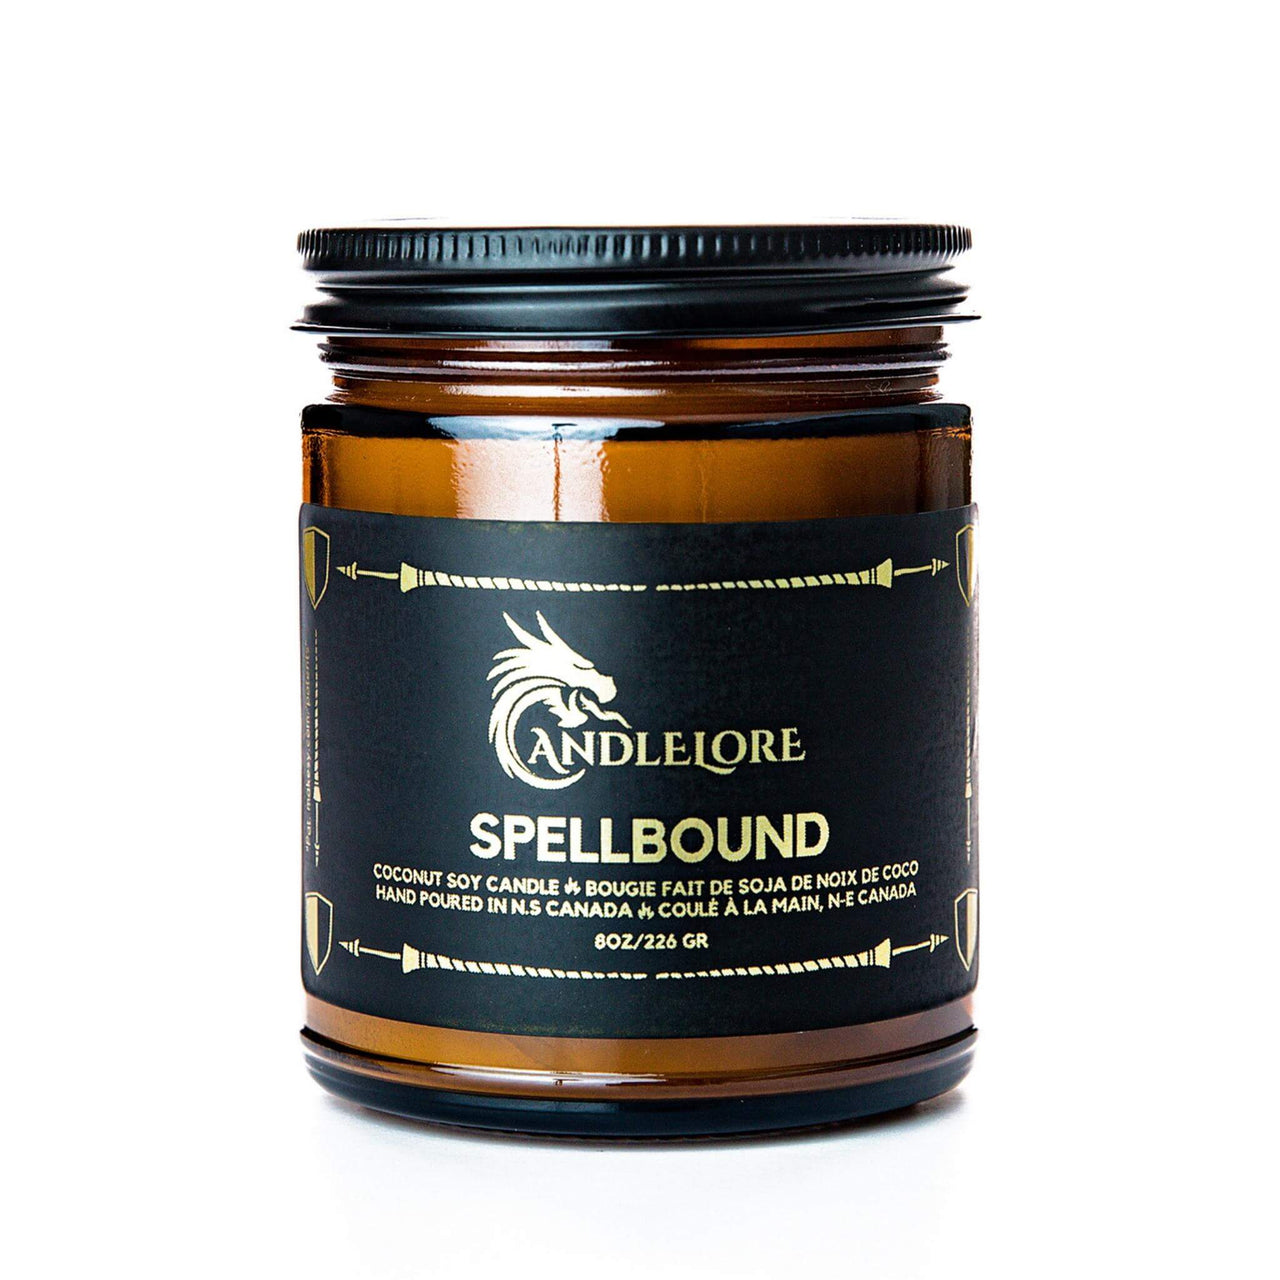 Medium Spellbound scented candle on a white background